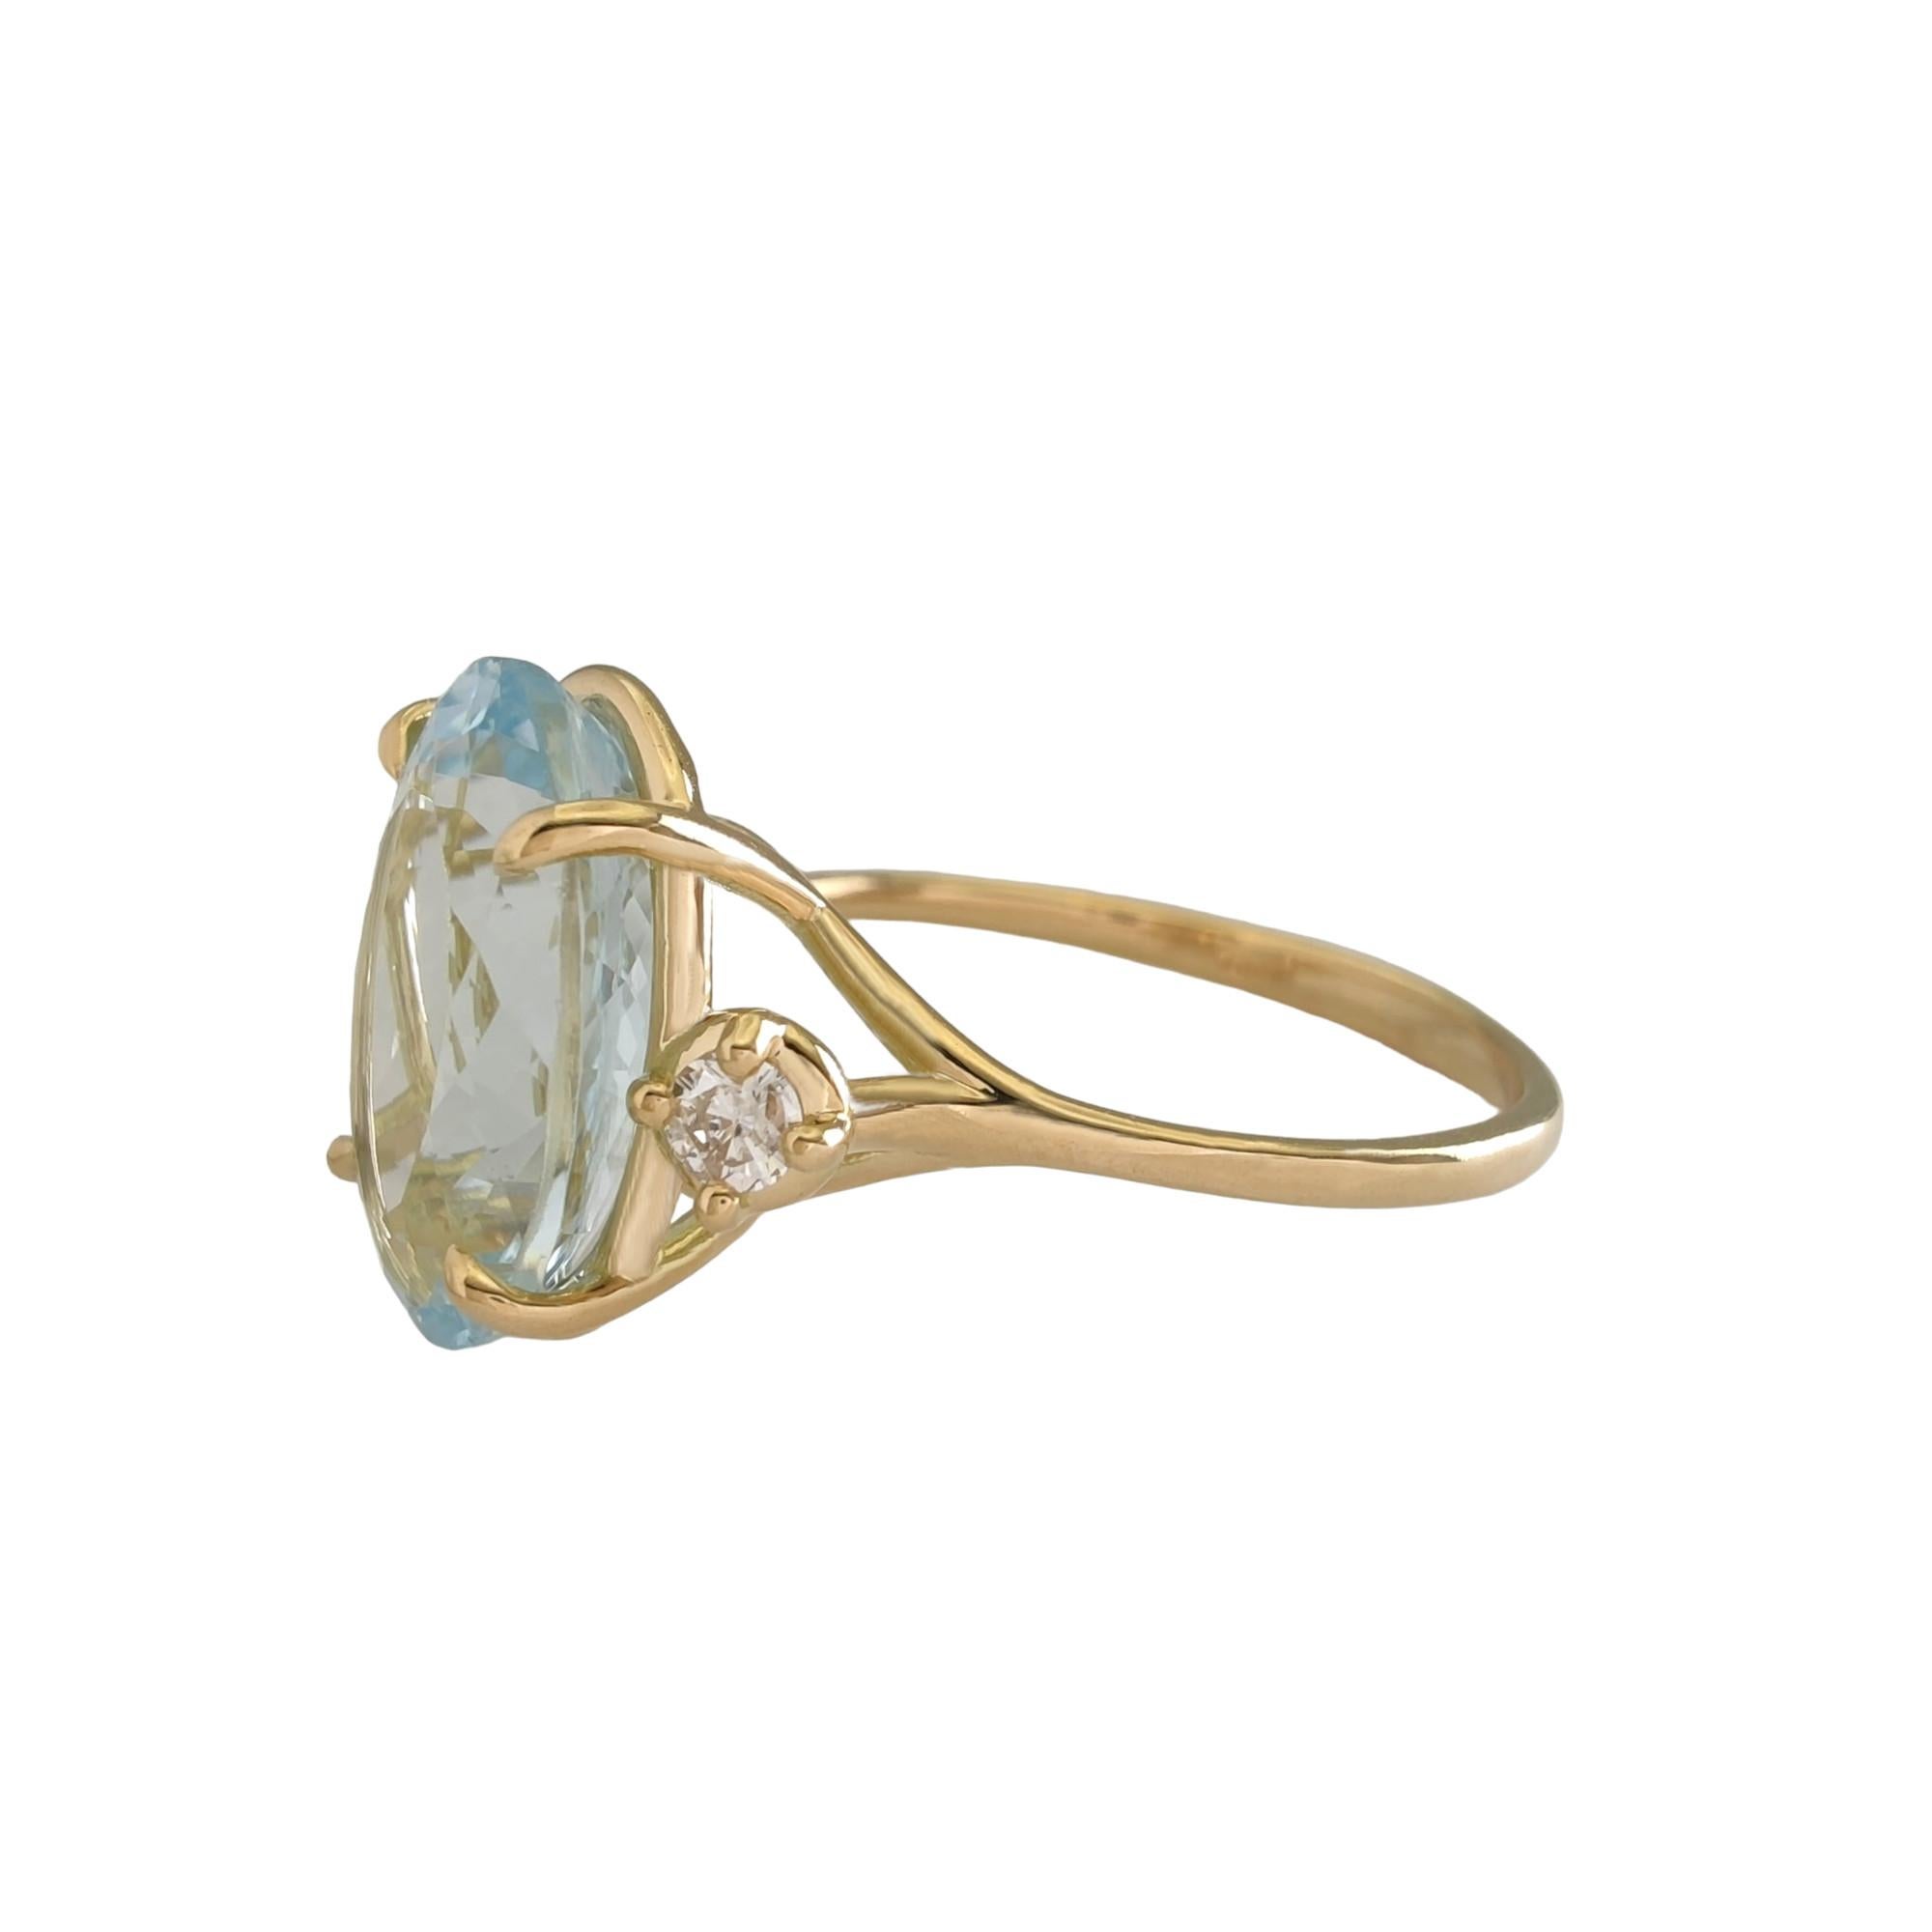 3, 93ct Oval Cut Aquamarine Engagement Ring, 18k Yellow Gold - Resizable For Sale 5